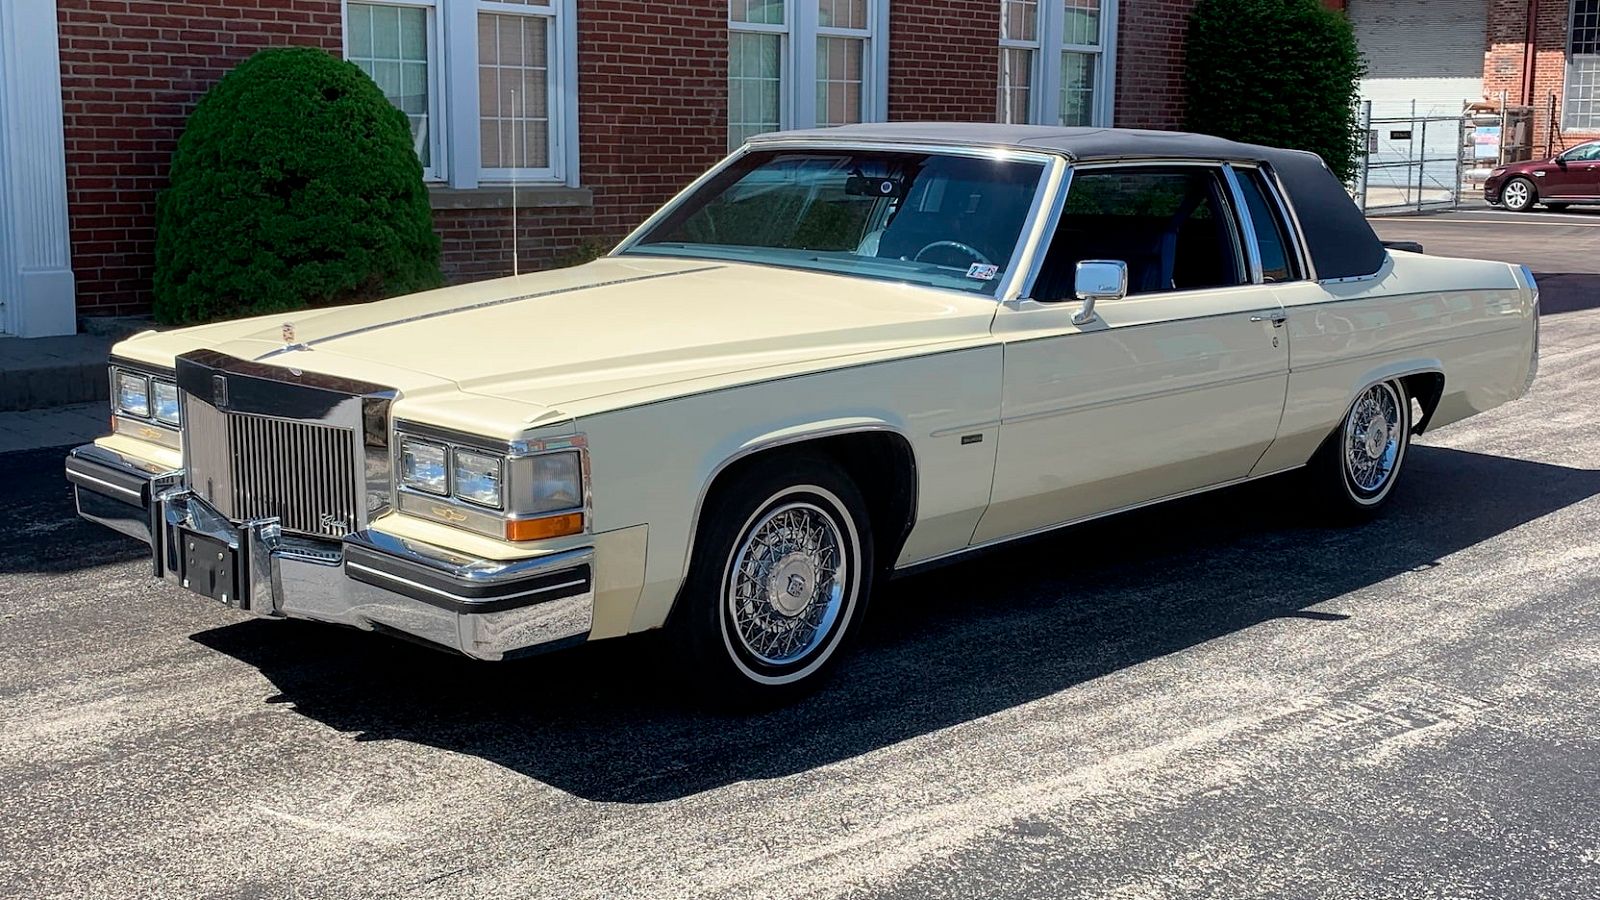 A parked 1984 Cadillac Coupe DeVille